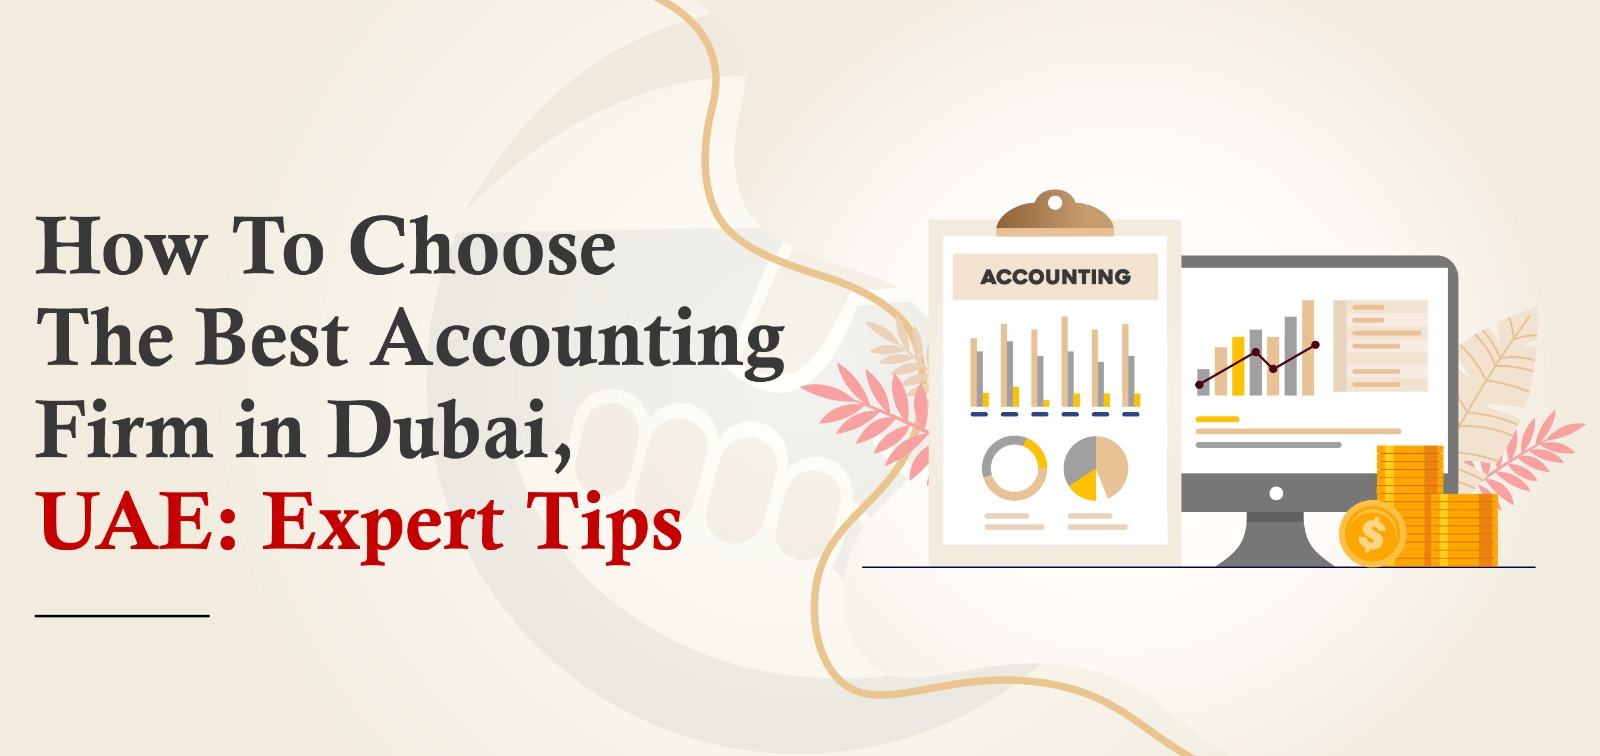 How to Choose the Best Accounting Firm in Dubai, UAE: Expert Tips